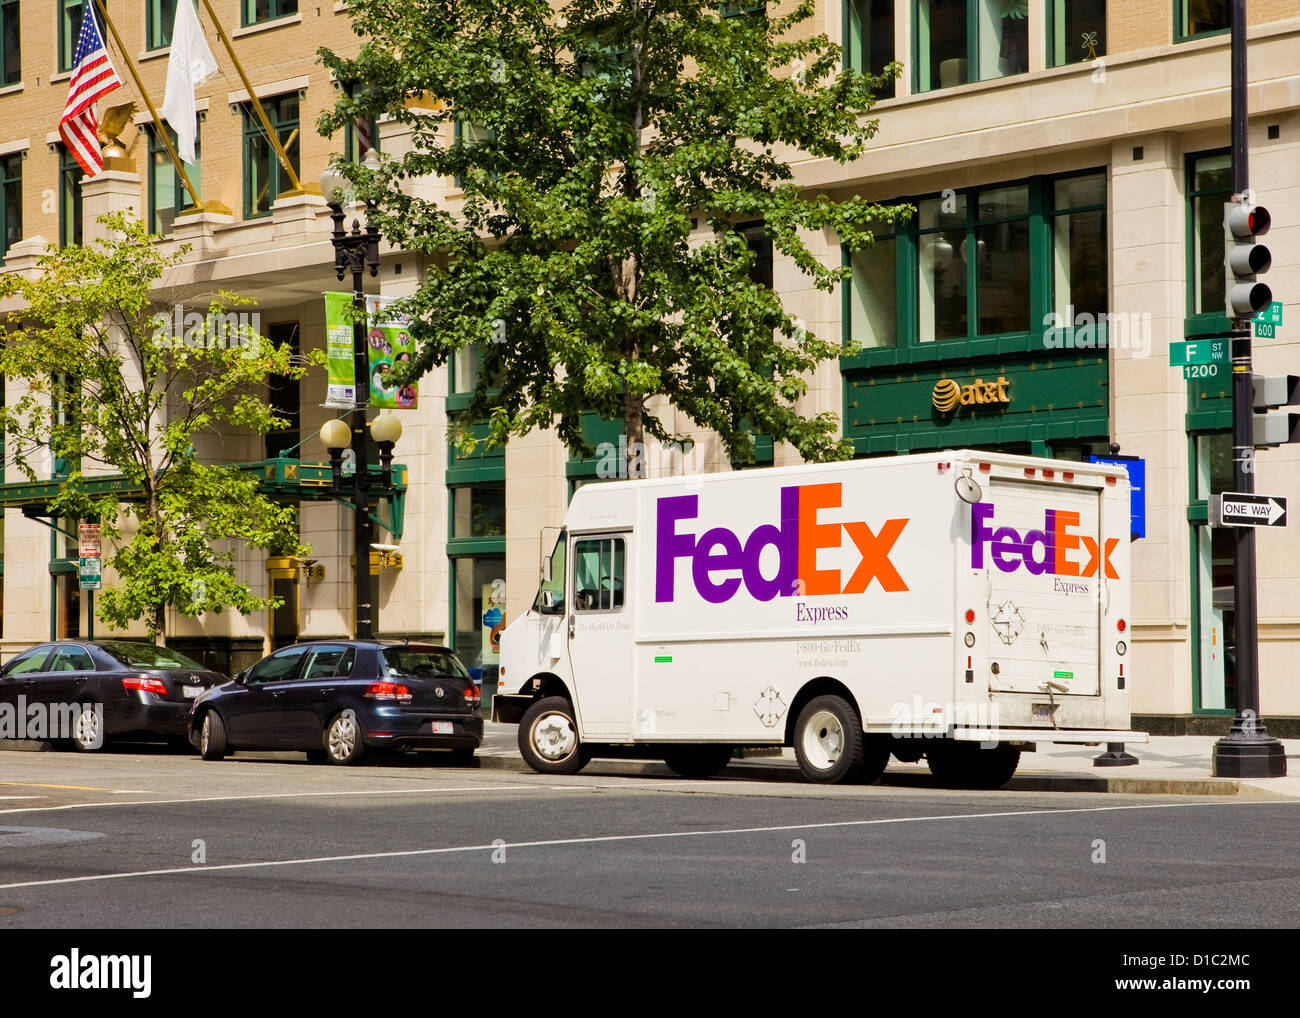 FedEx delivery truck parked on street - Washington, DC USA Stock Photo